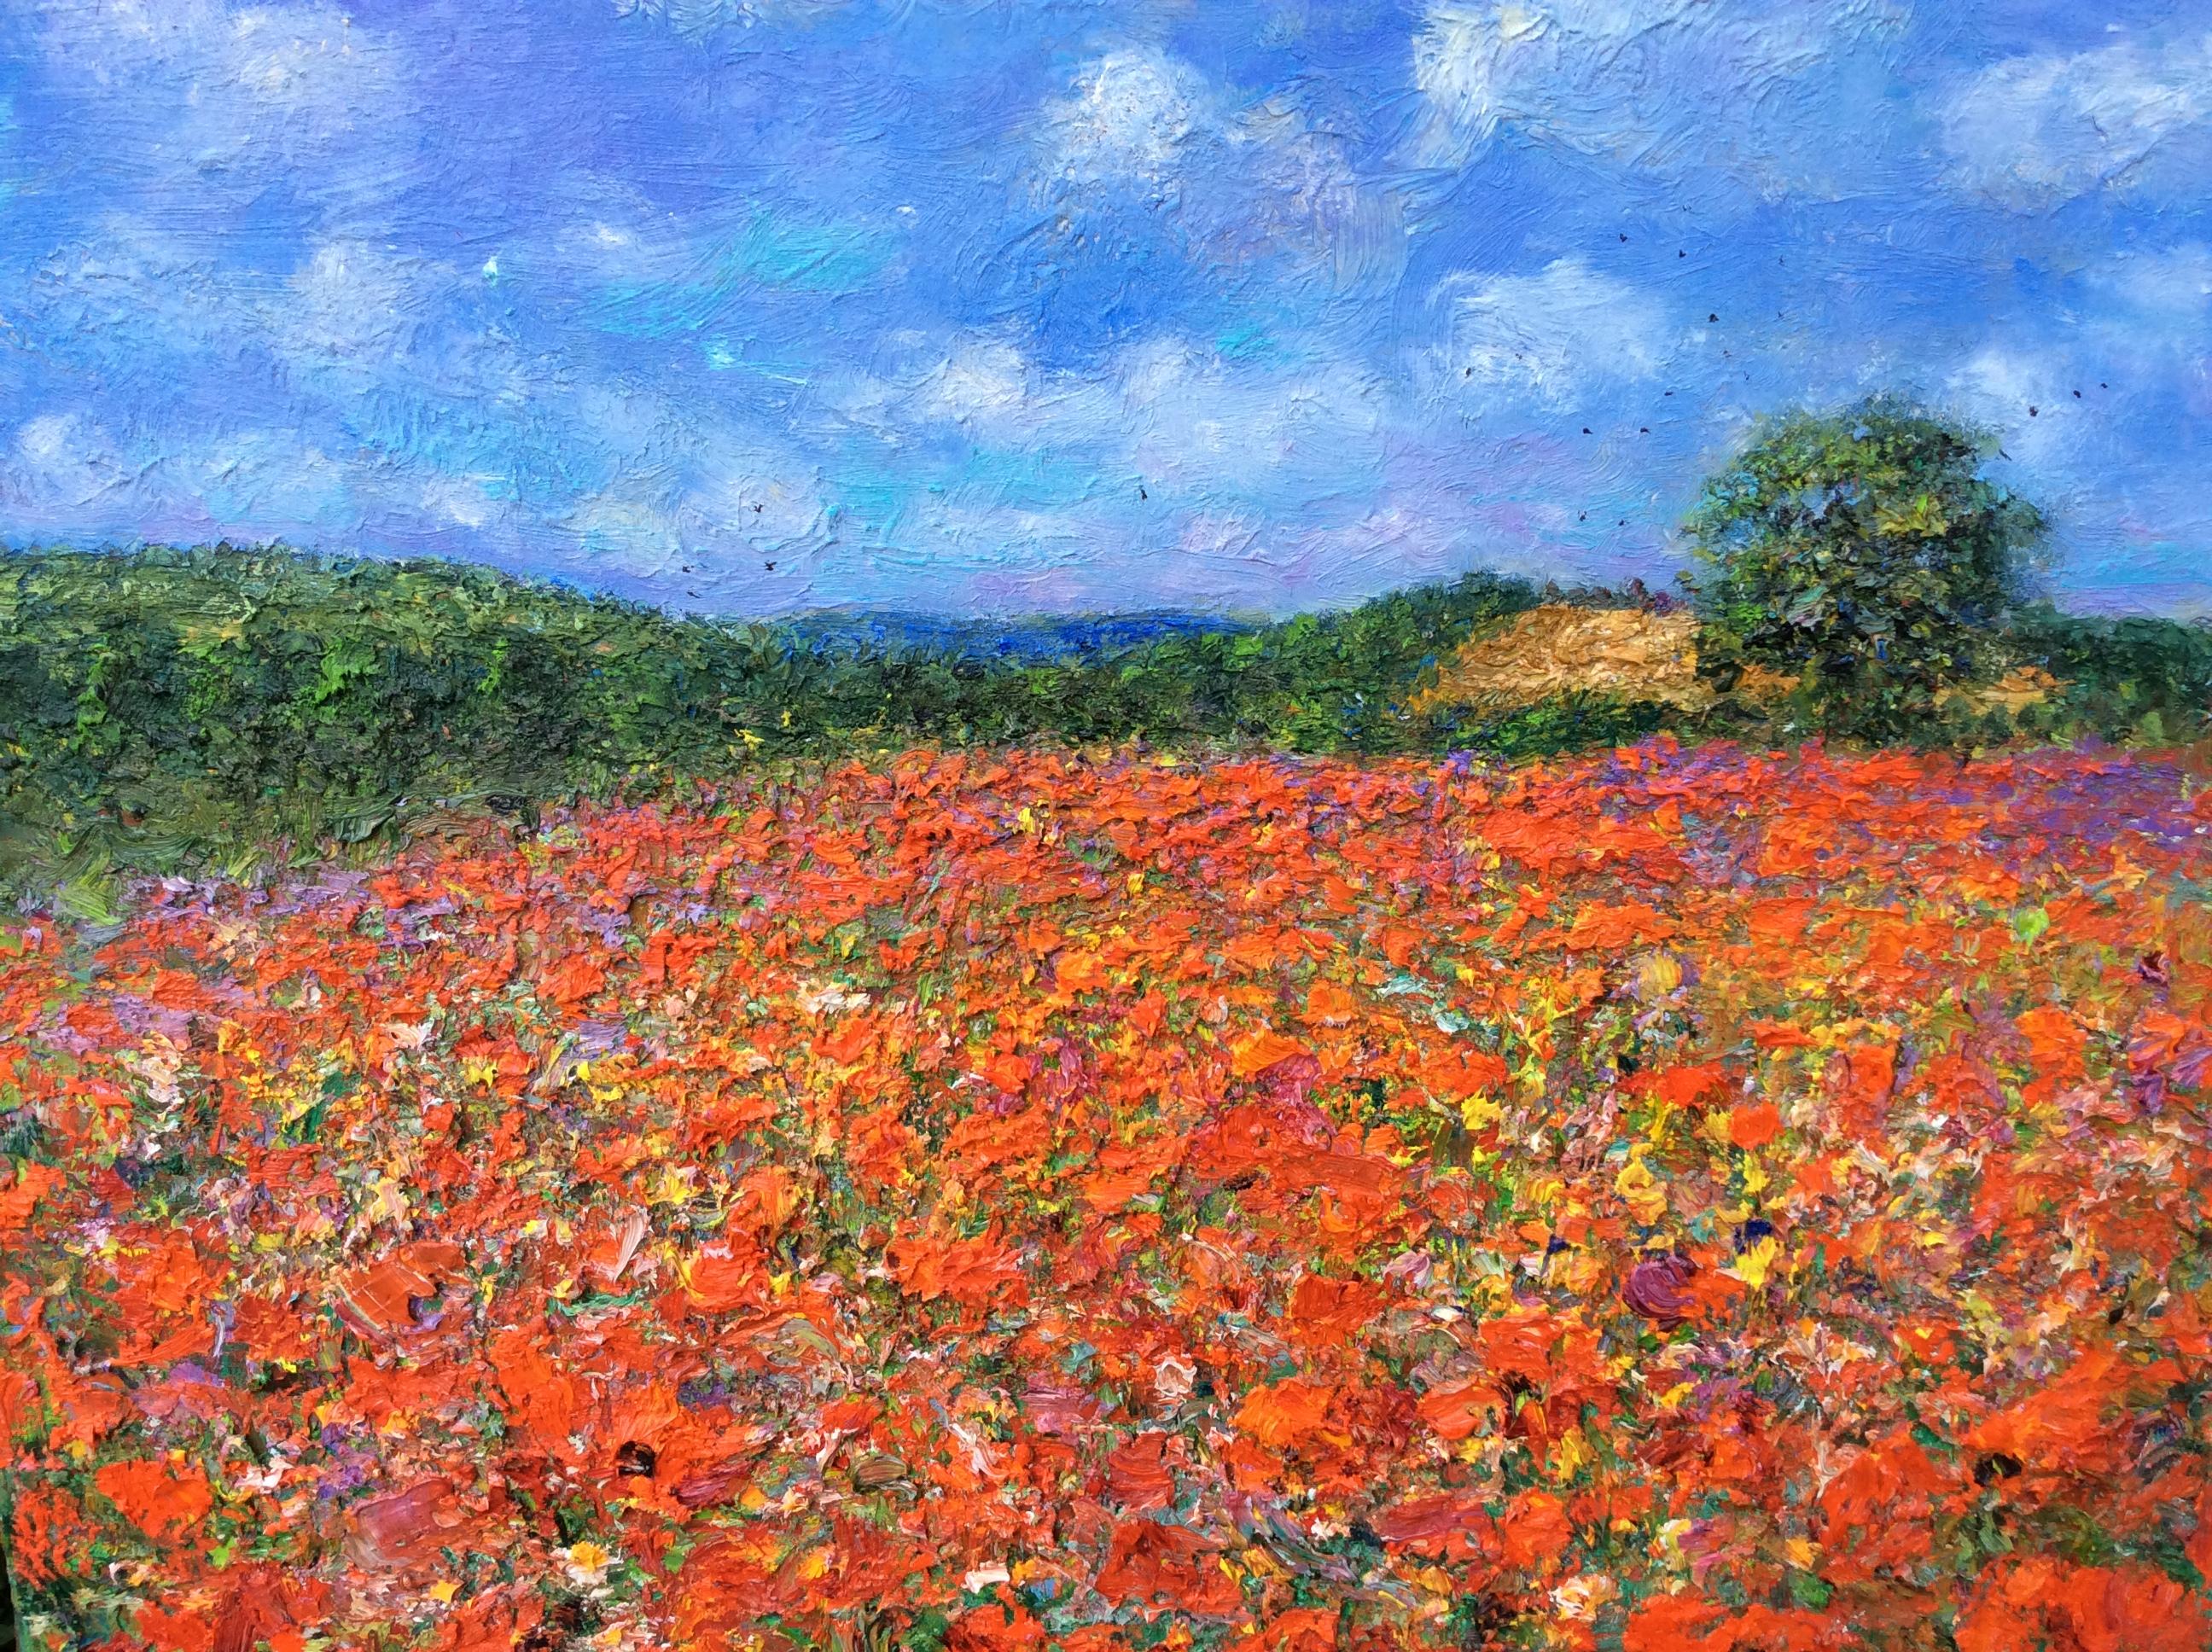 Michael Strang Landscape Painting - Poppy Field, English Contemporary Impressionist Landscape Oil Painting